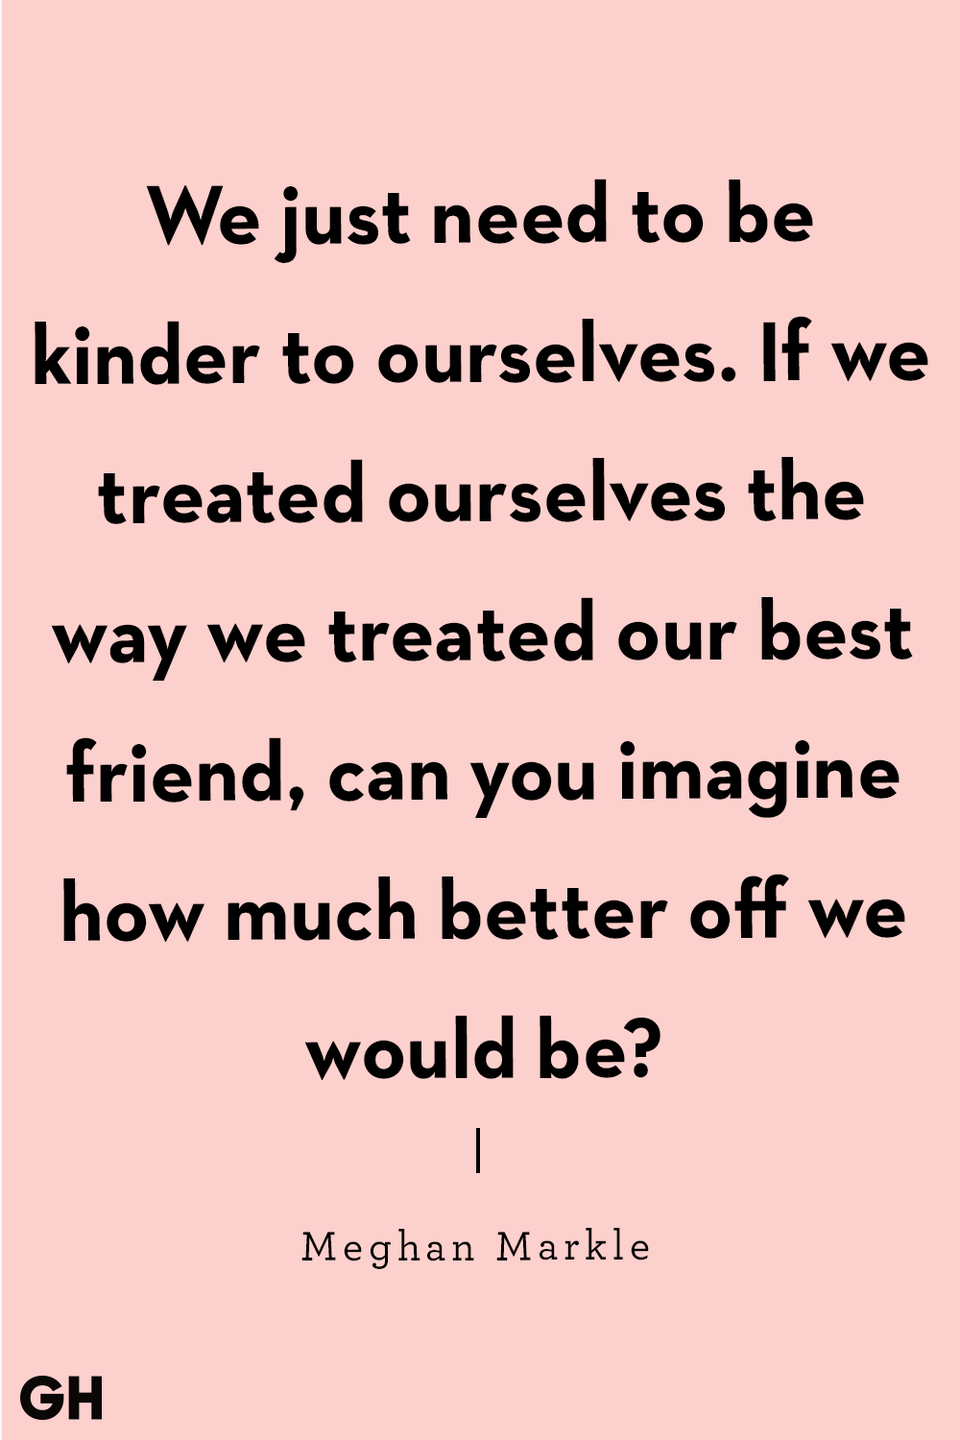 <p>"We just need to be kinder to ourselves. If we treated ourselves the way we treated our best friend, can you imagine how much better off we would be?" </p>